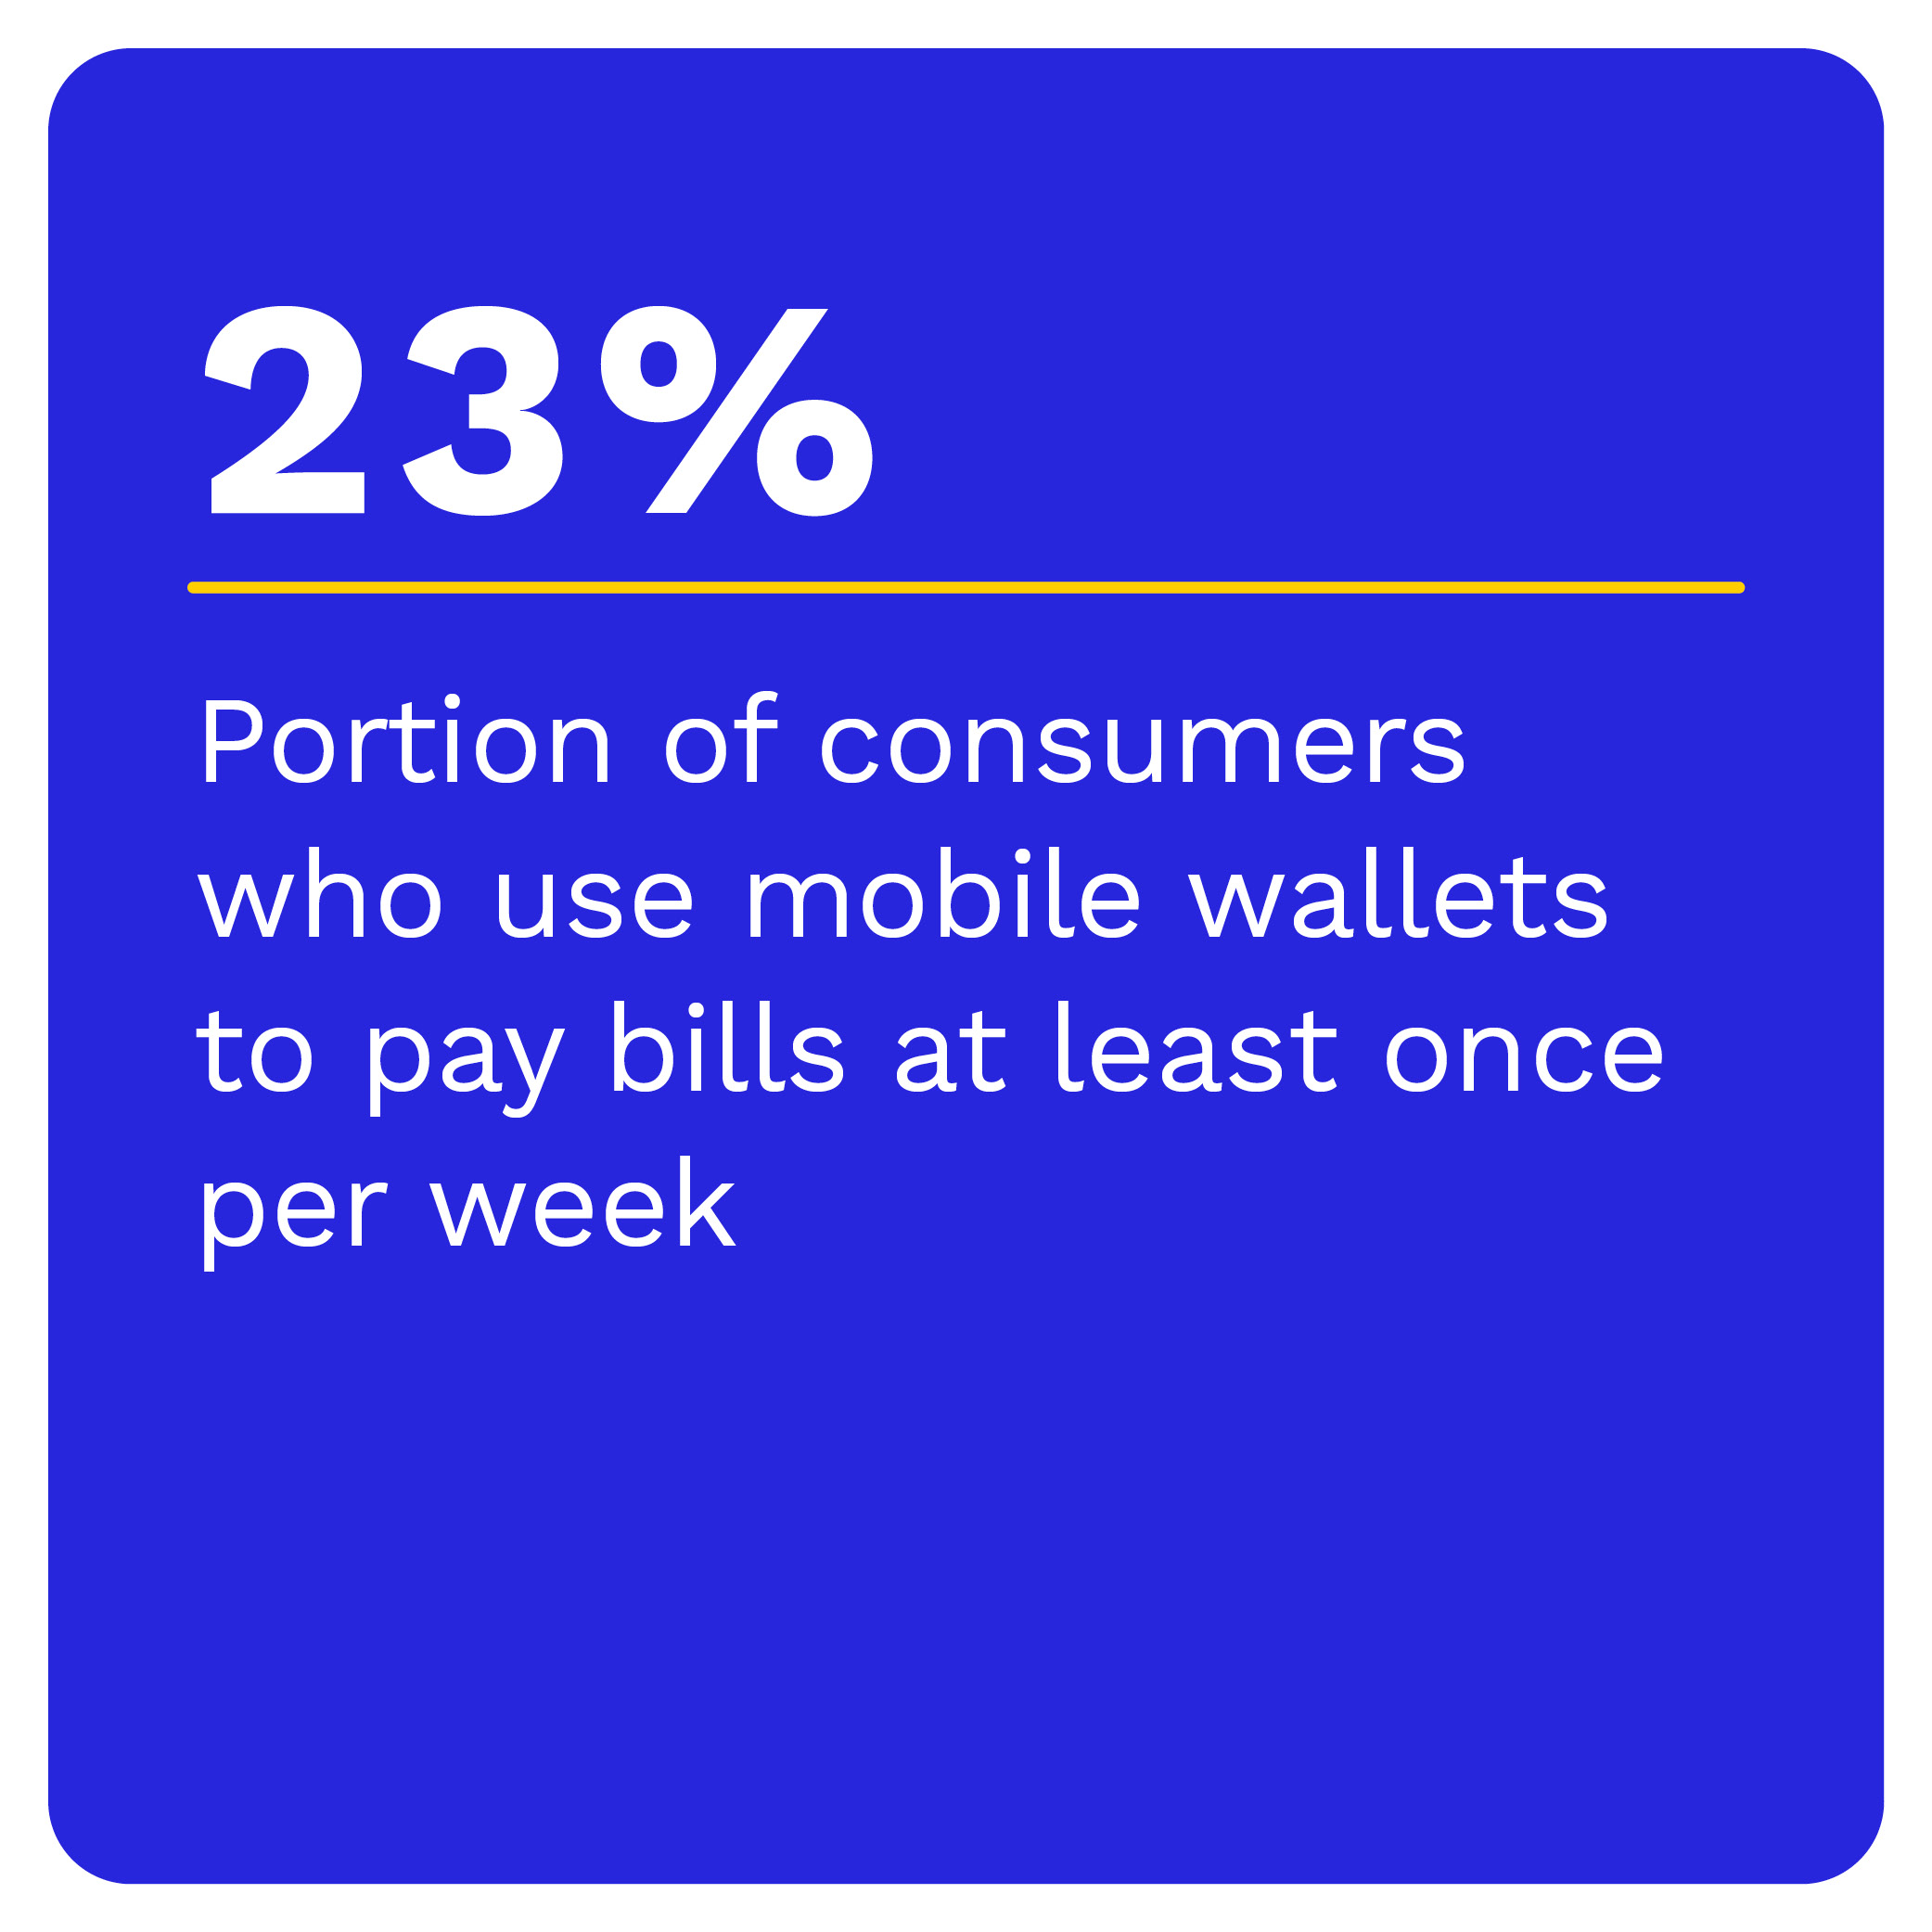 23%: Portion of consumers who use mobile wallets to pay bills at least once per week